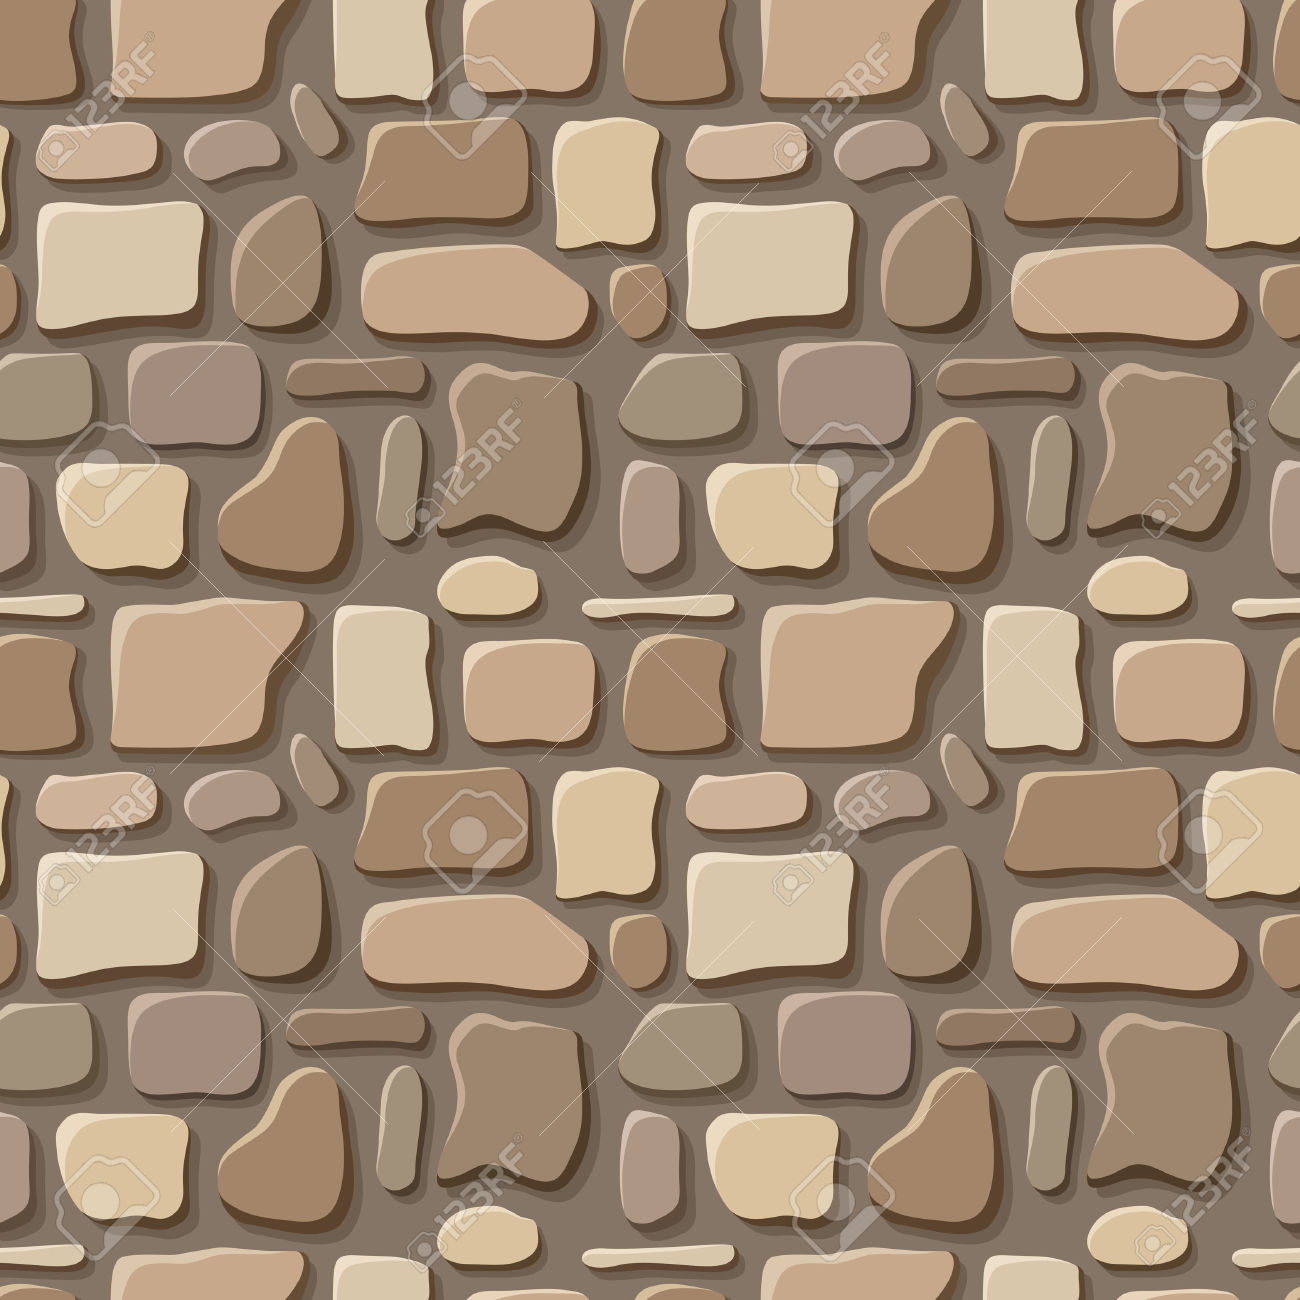 Stone wall texture clipart 20 free Cliparts | Download images on